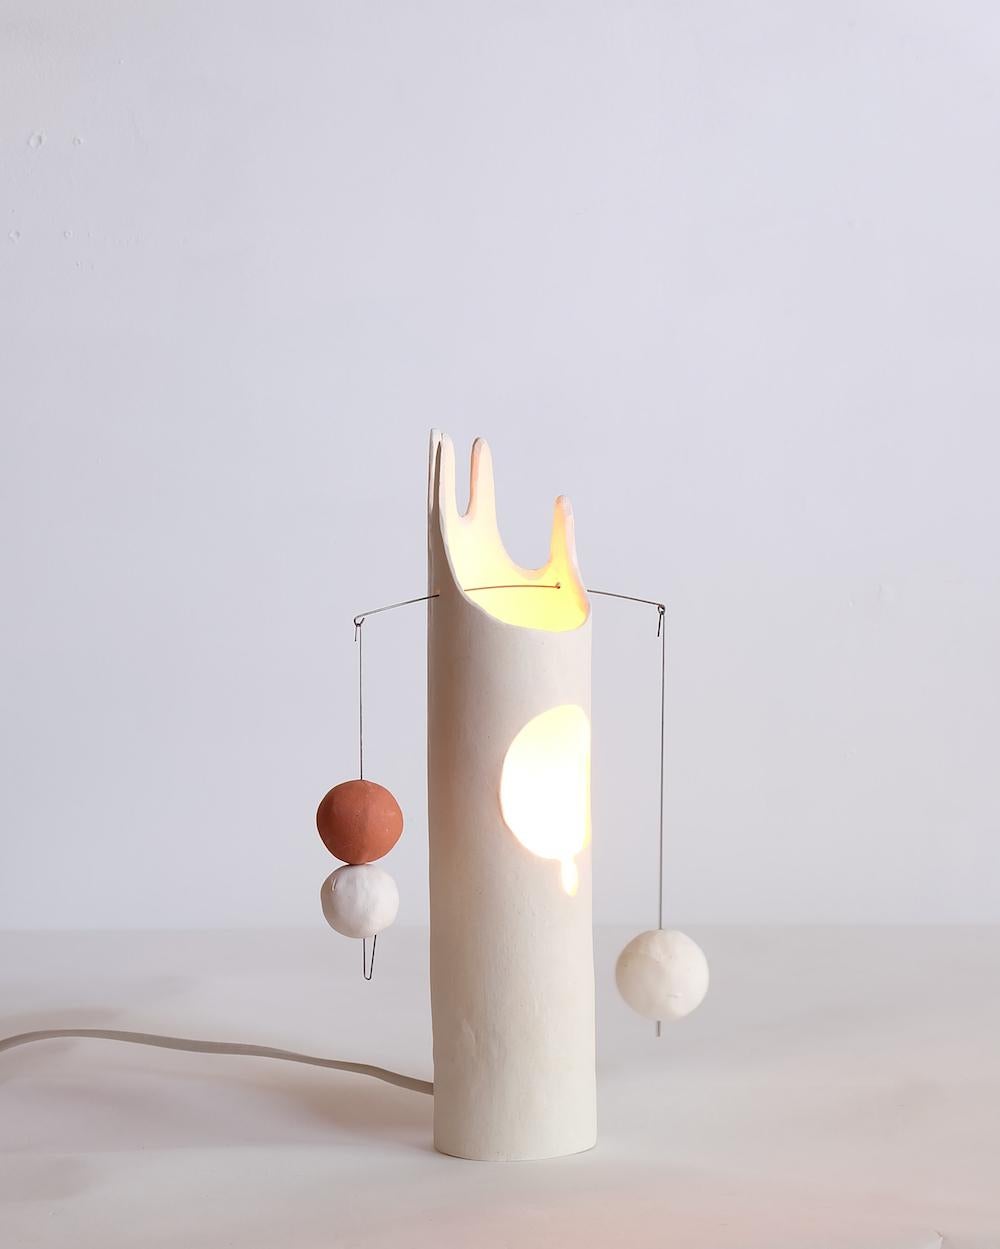 Metal Nico Lamp, Sculptural Contemporary Hand-Built Ceramic Table Lamp in Matte White For Sale